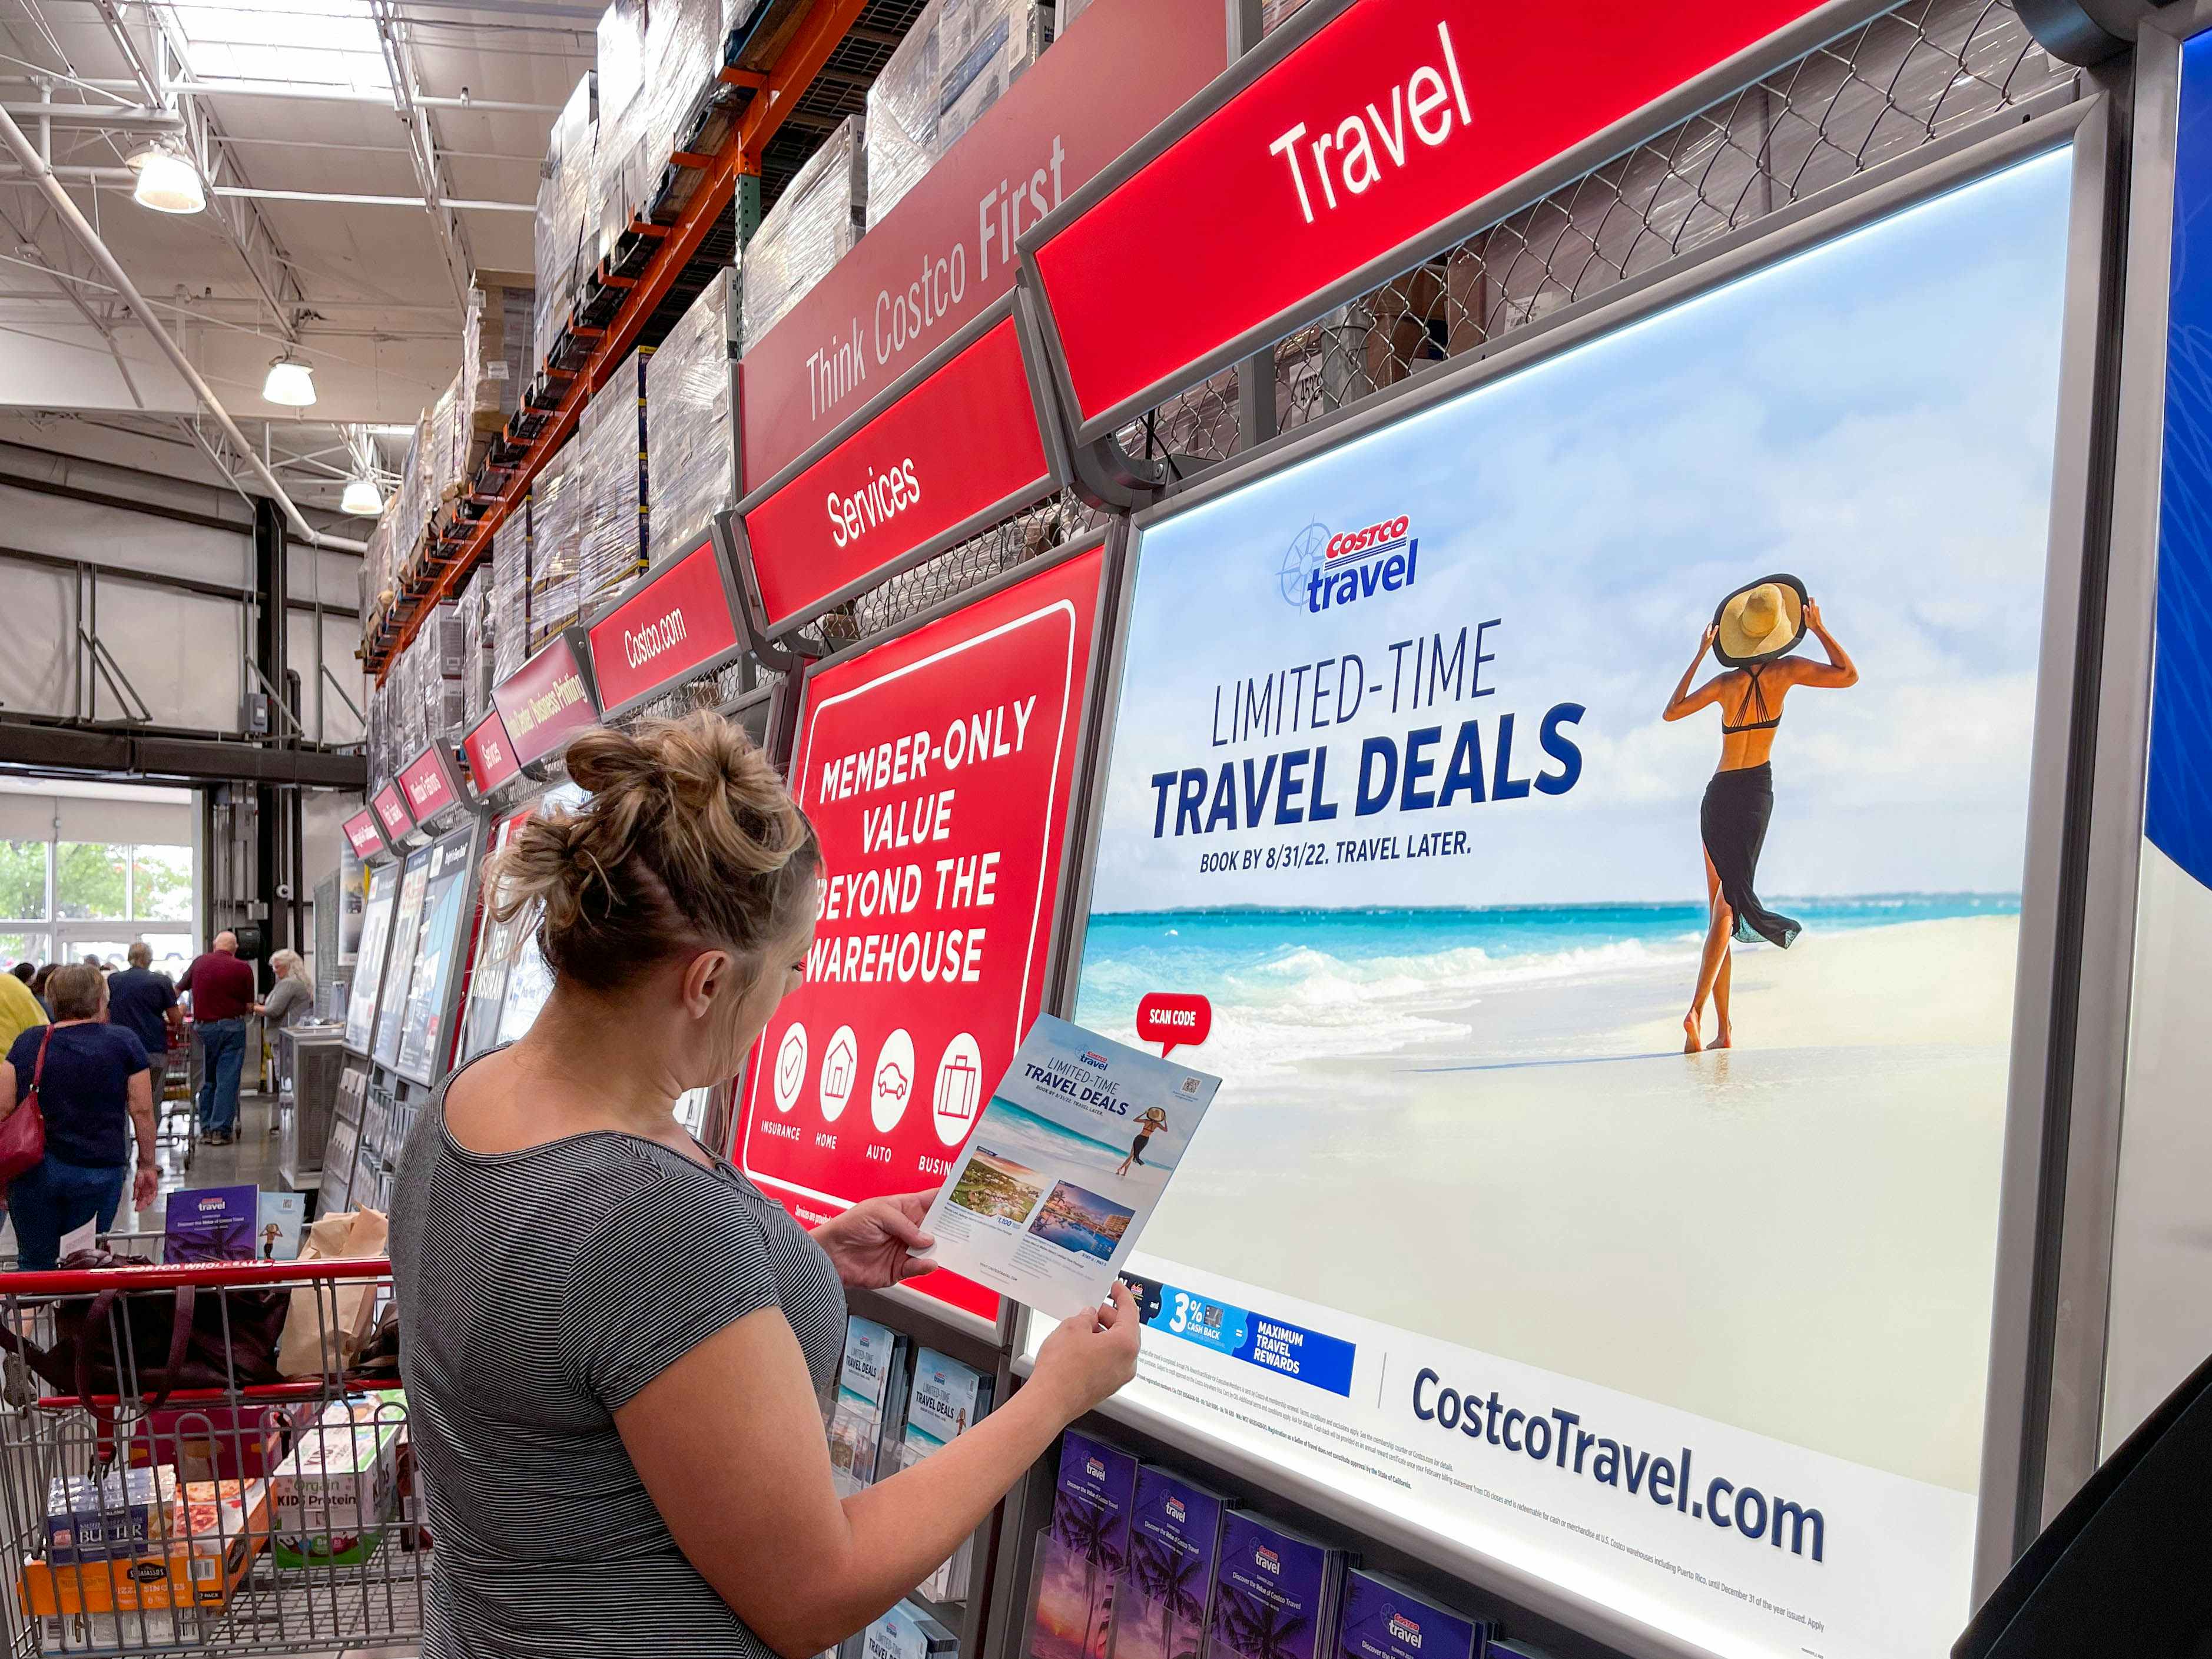 Travel Agent Takes on Costco Travel at Its Own Game